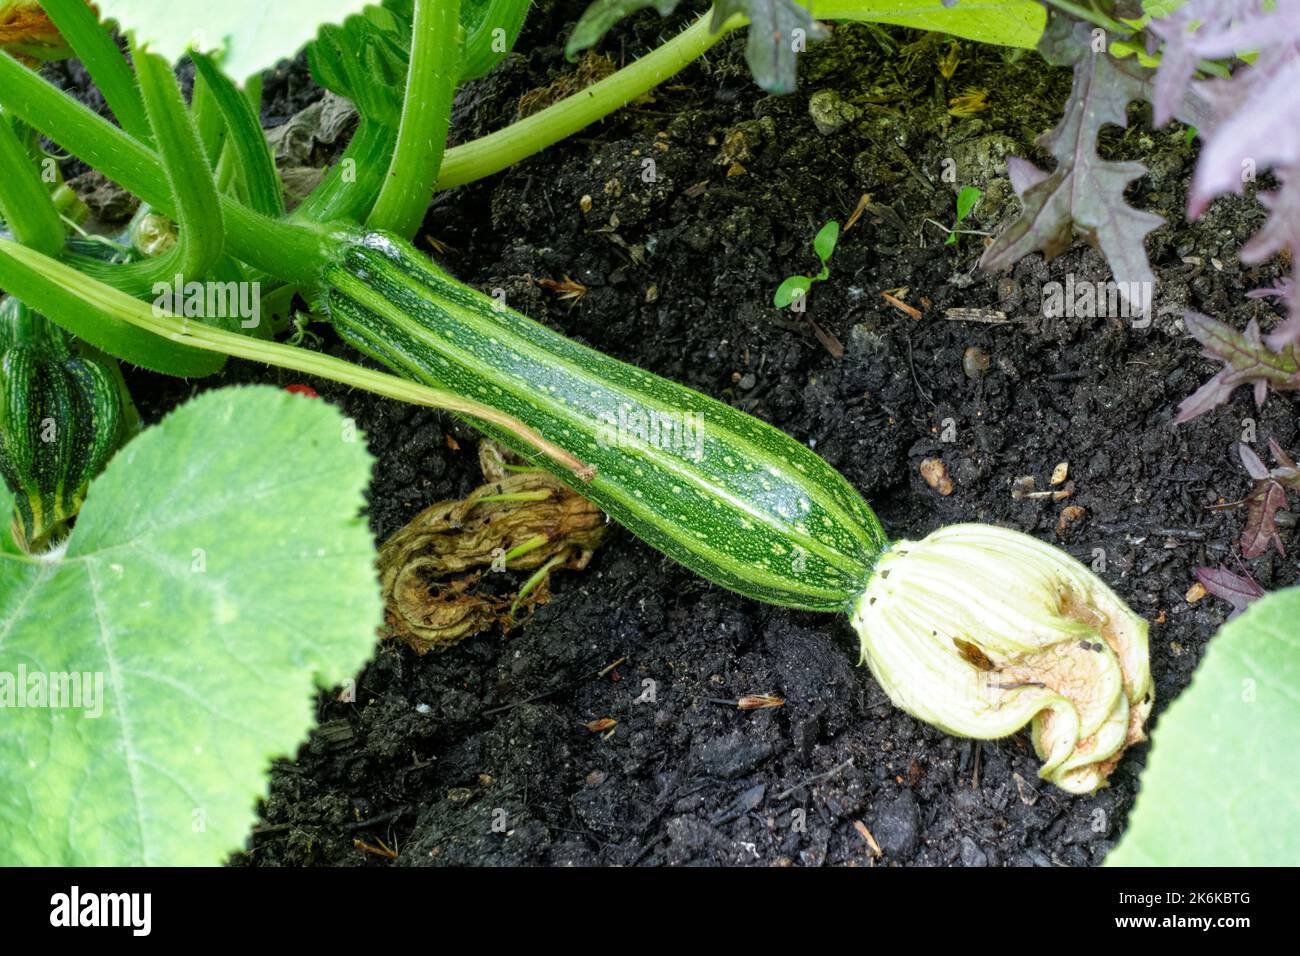 courgette or zucchini growing in a garden Stock Photo